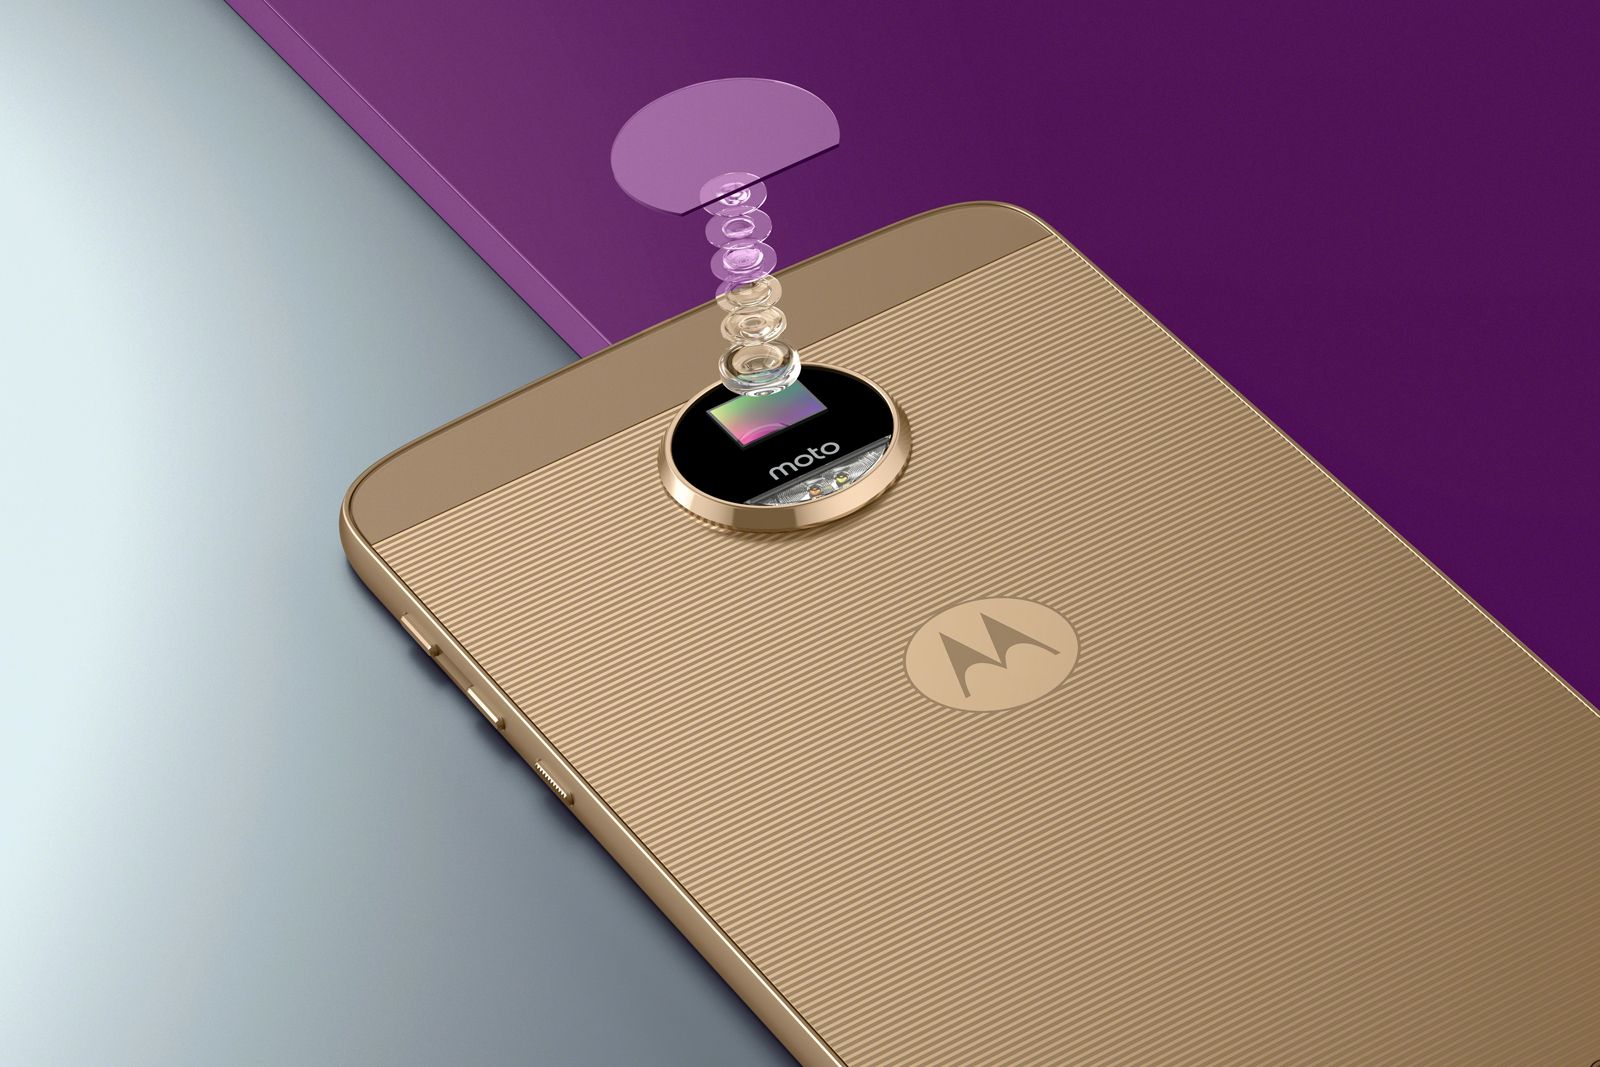 motorola moto z and moto z force release date specs and everything you need to know image 3